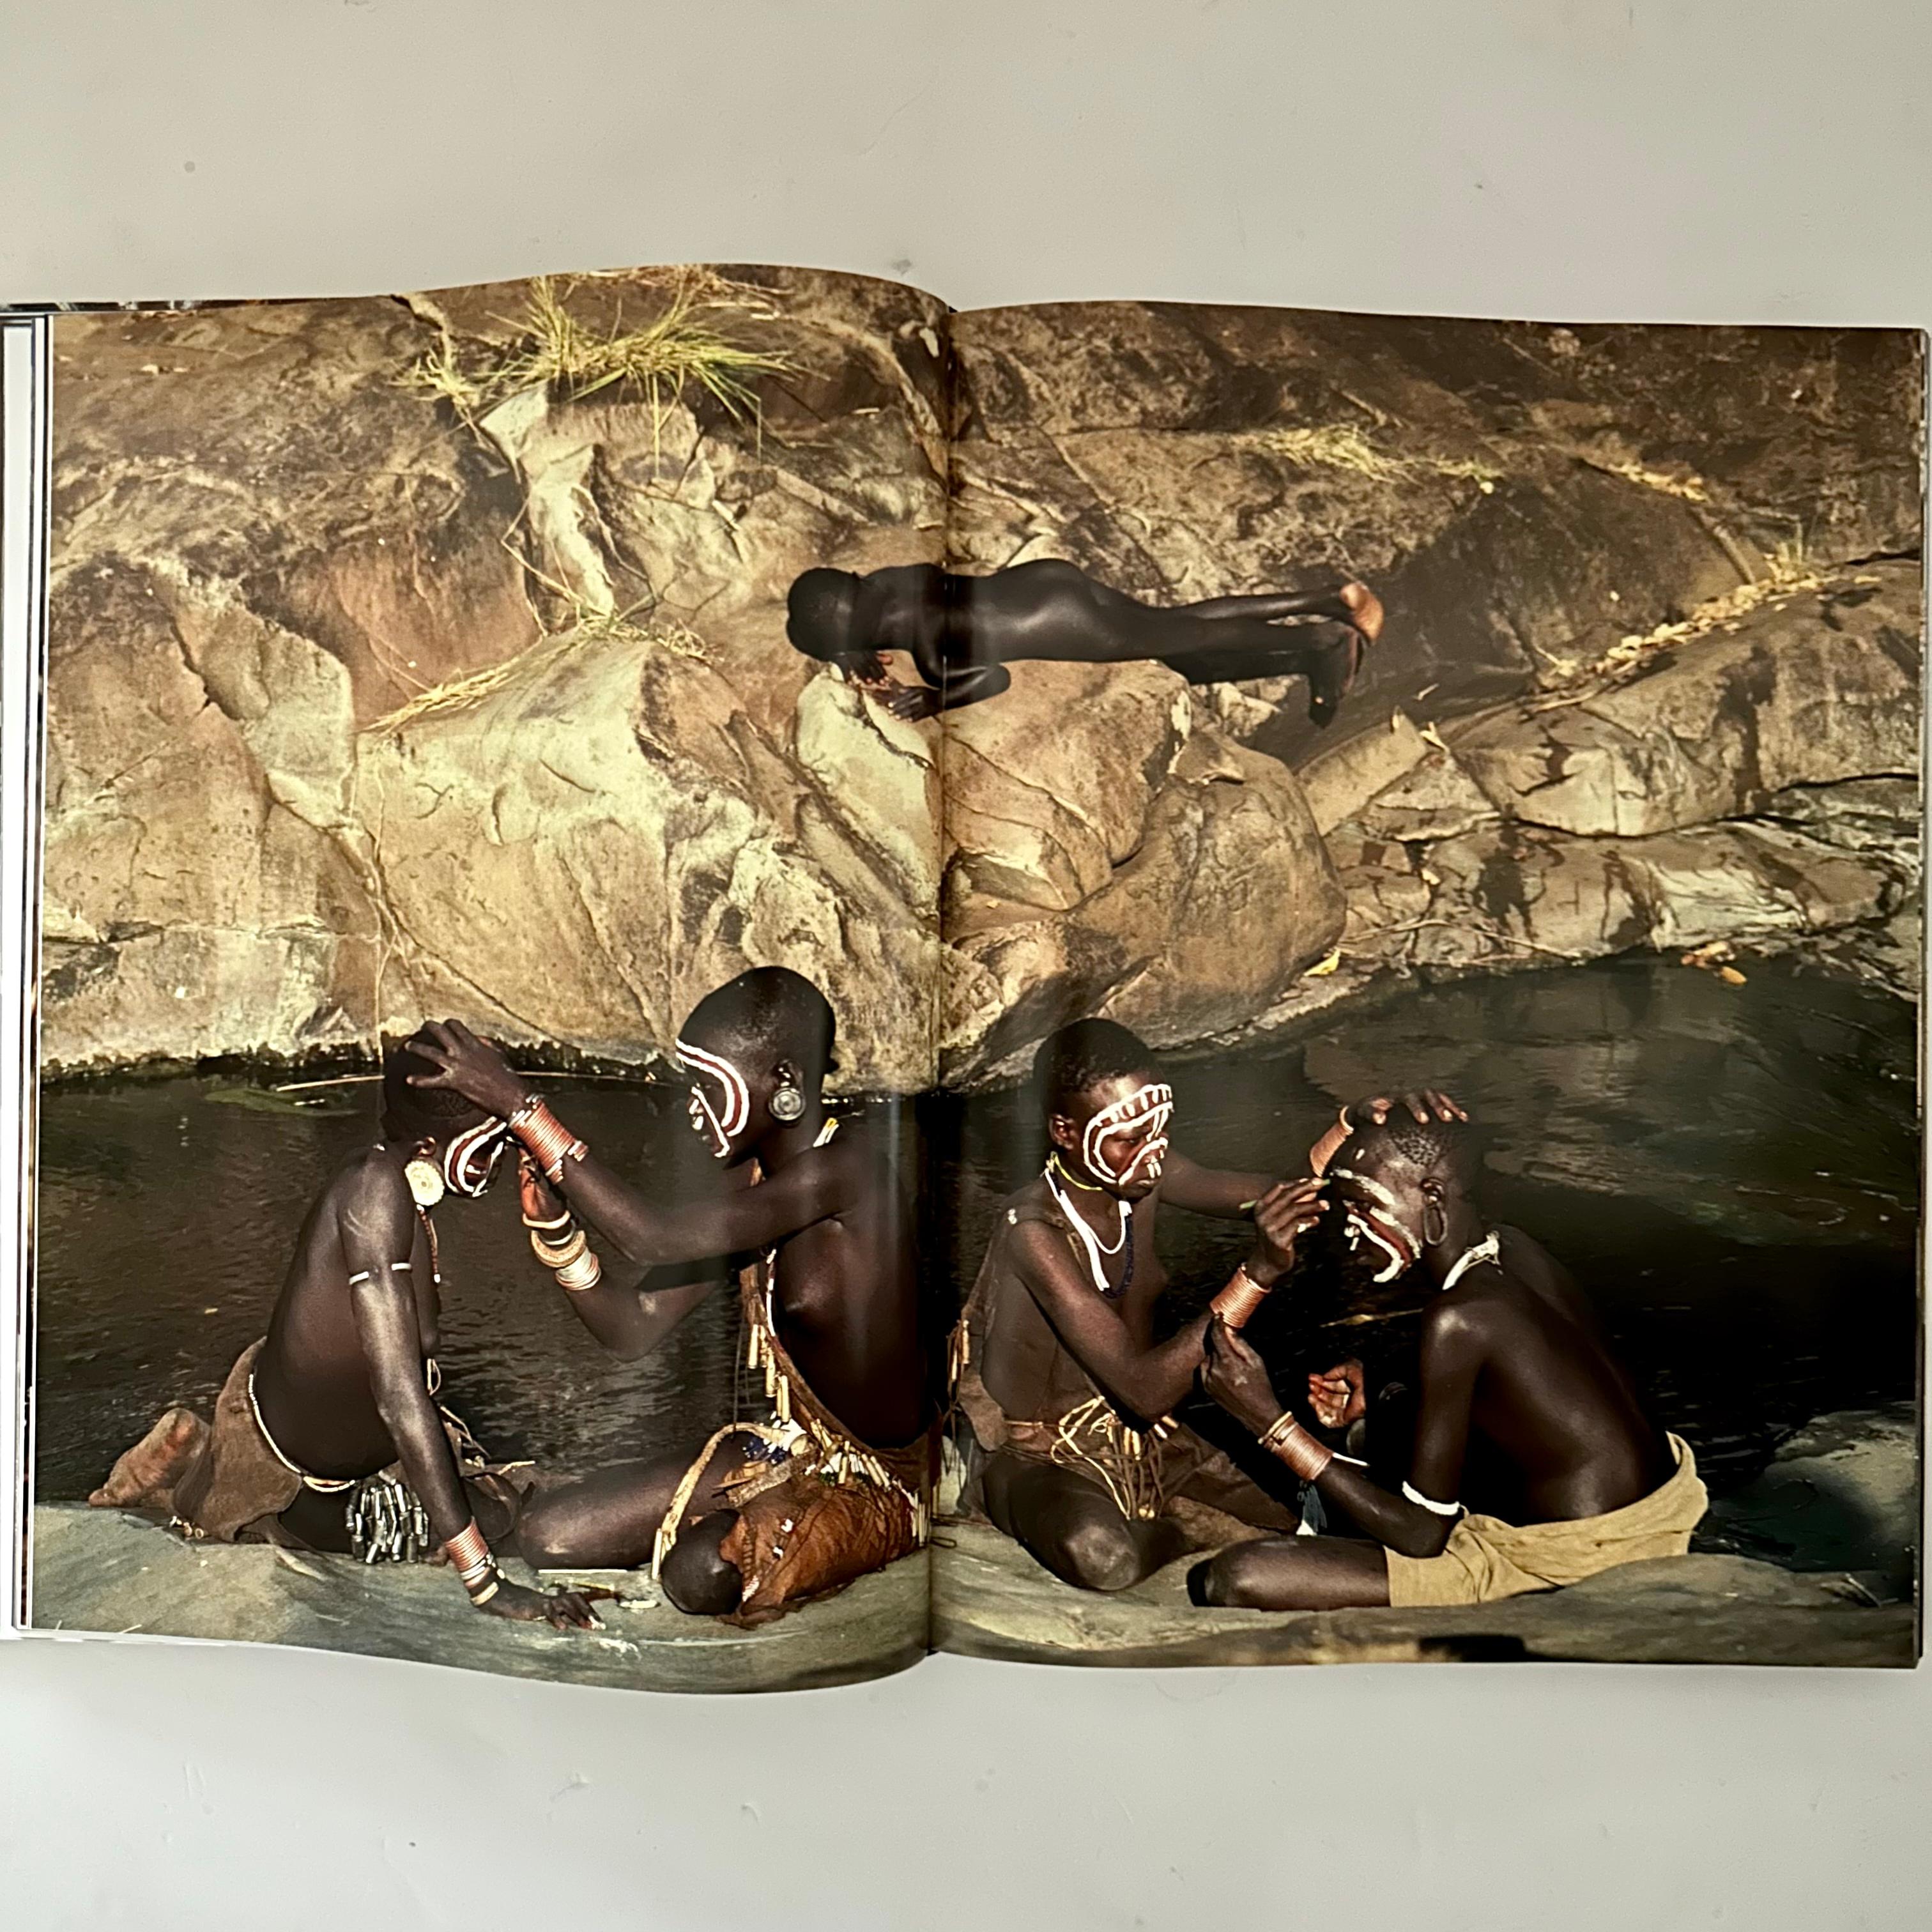 Published by Éditions de la Martinière, 1st French edition, translated from English, Paris, 2002. Hardback with French text.

Carol Beckwith and Angela Fisher are a photographer duo who have worked together for over 35 years, documenting Africa from